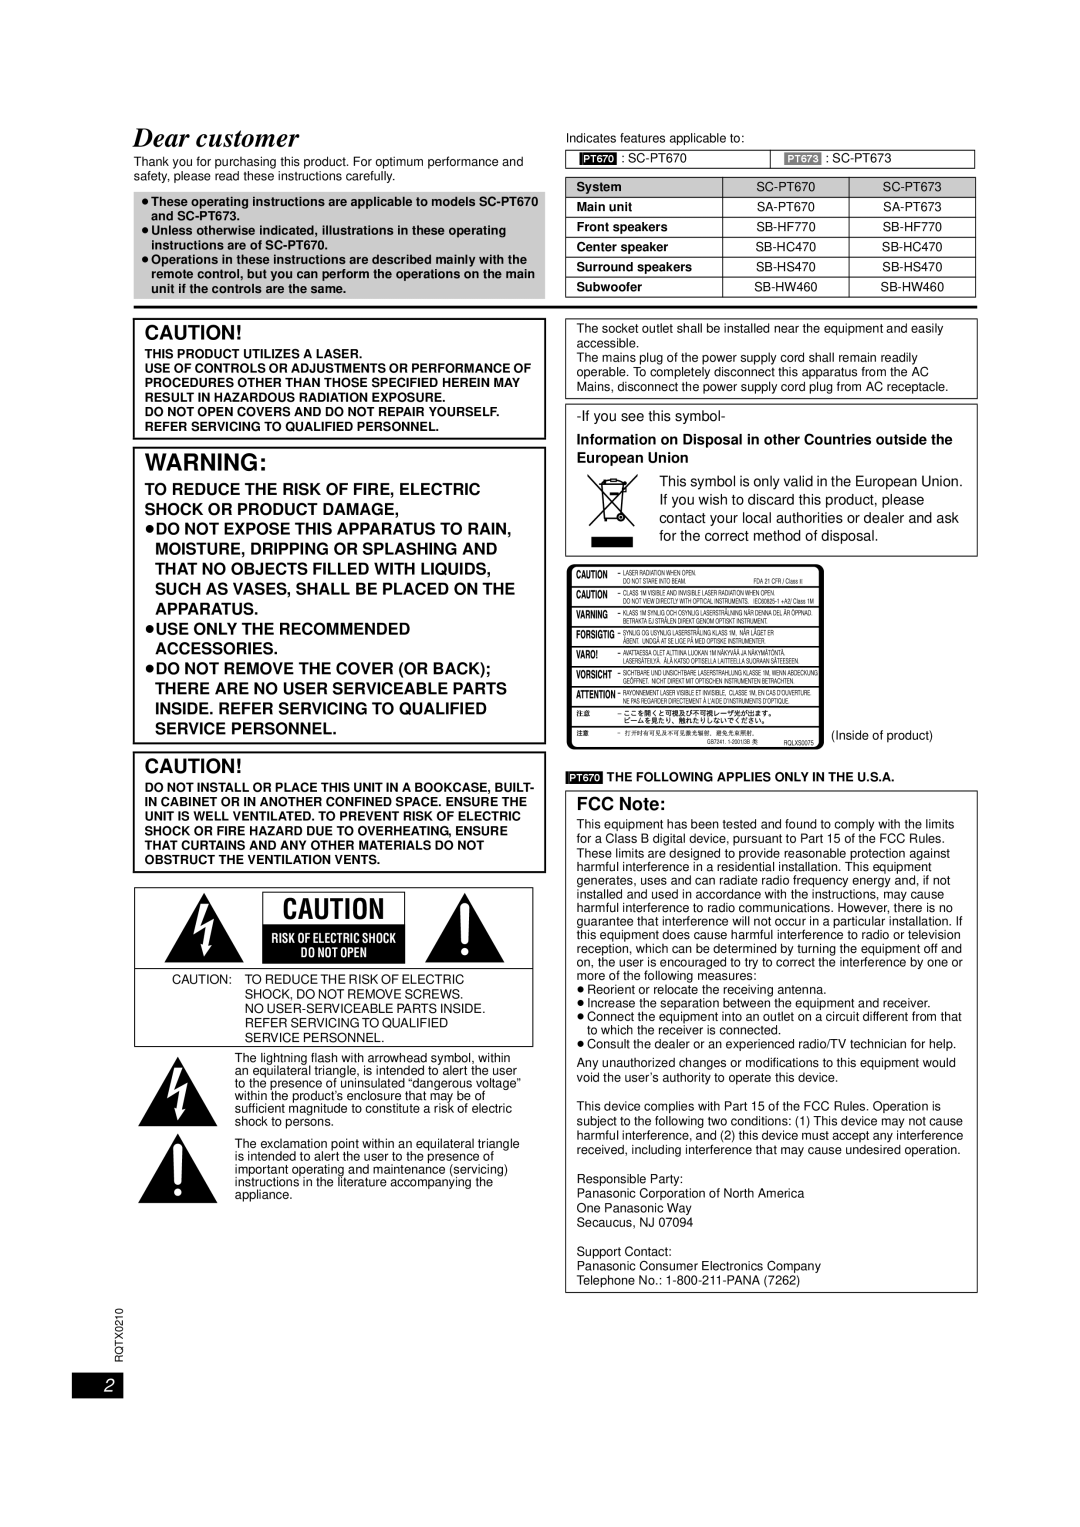 Panasonic SC-PT670, SC-PT673 manual FCC Note, ≥Do Not Expose This Apparatus To Rain, ≥Use Only The Recommended Accessories 